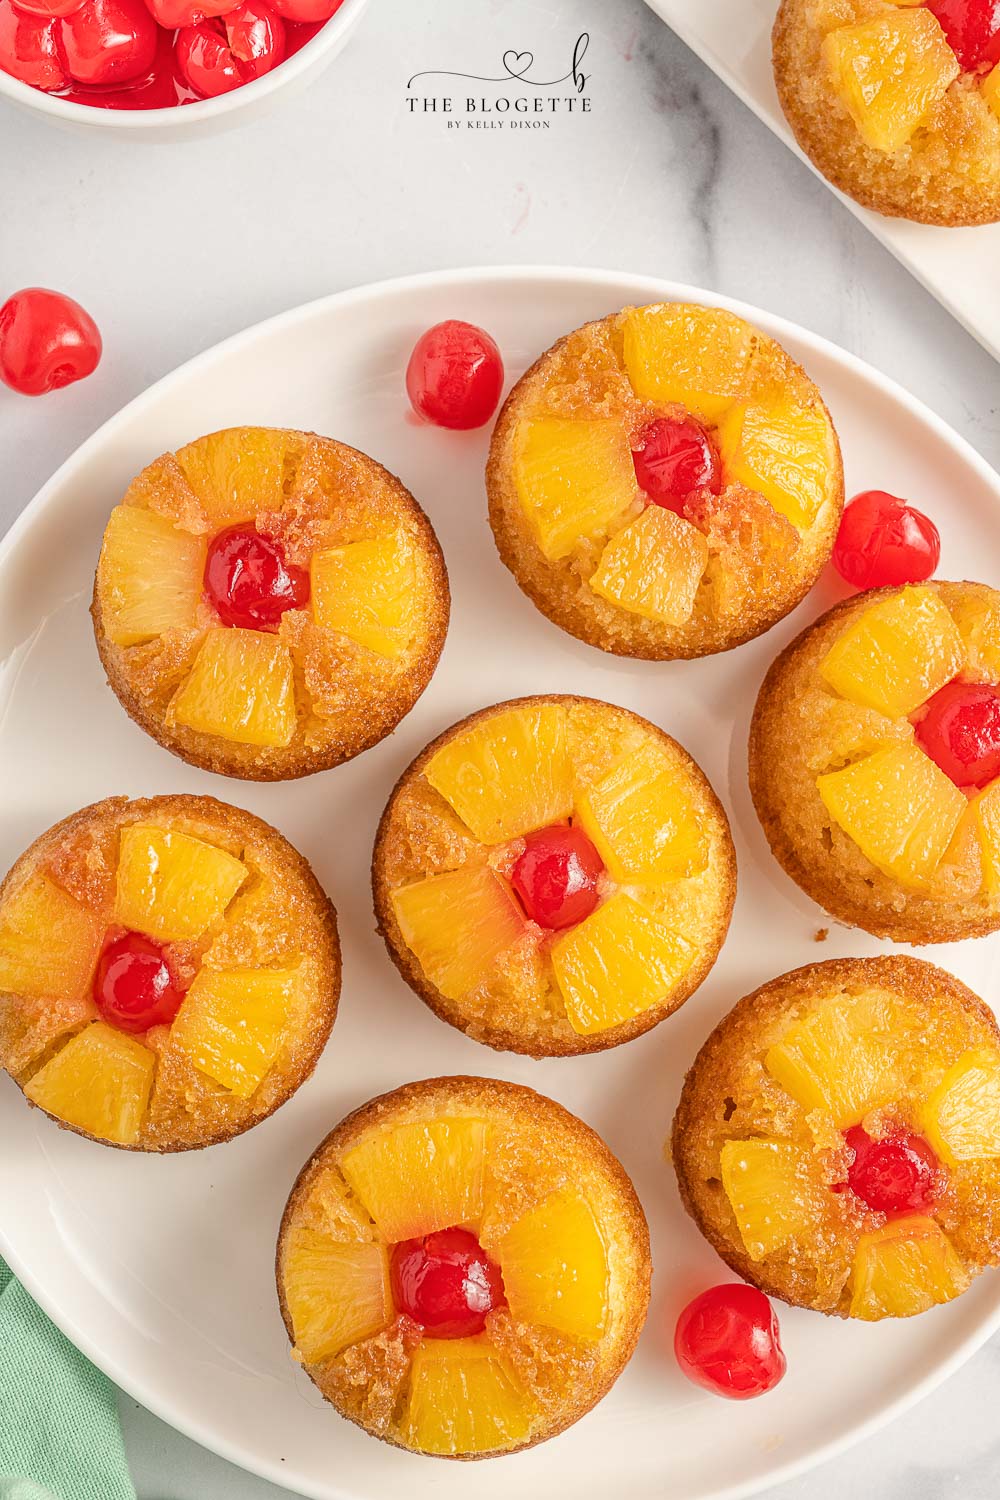 Easy Pineapple Upside Down Cupcakes Recipe! Soft, buttery sweet cupcakes with a moist top, tender pineapple pieces, and cherry on top. 